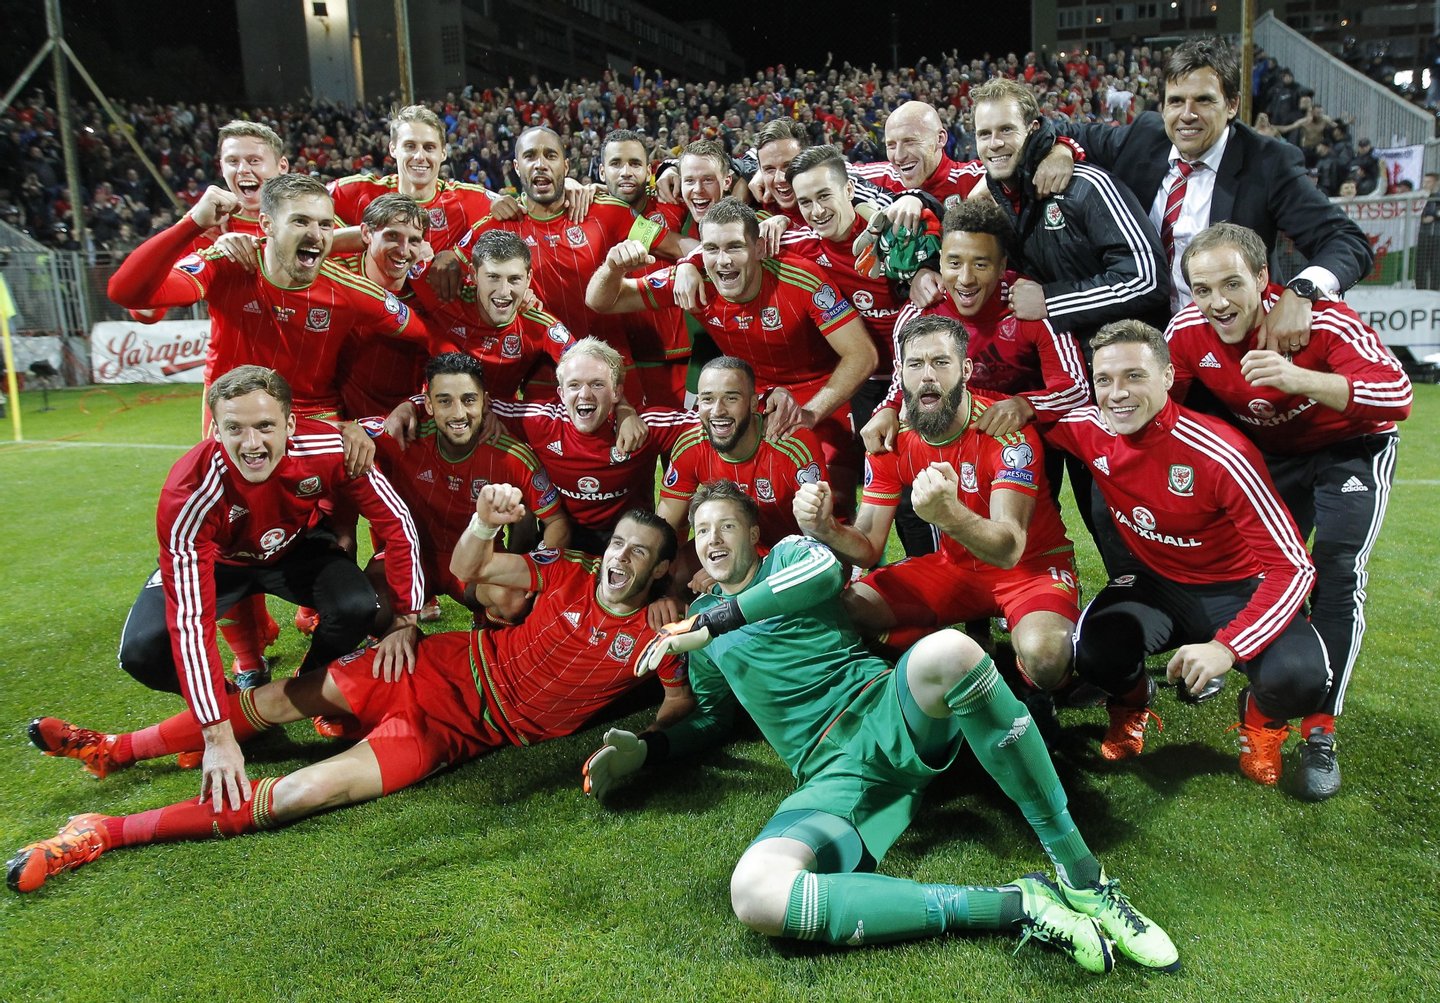 ZENICA, BOSNIA AND HERZEGOVINA - OCTOBER 10: Players of Wales national team celebrate the Euro 2016 qualifying football match between Bosnia and Herzegovina and Wales at the Stadium Bilino Polje in Elbasan on October 10, 2015. (Photo by Srdjan Stevanovic/Getty Images)